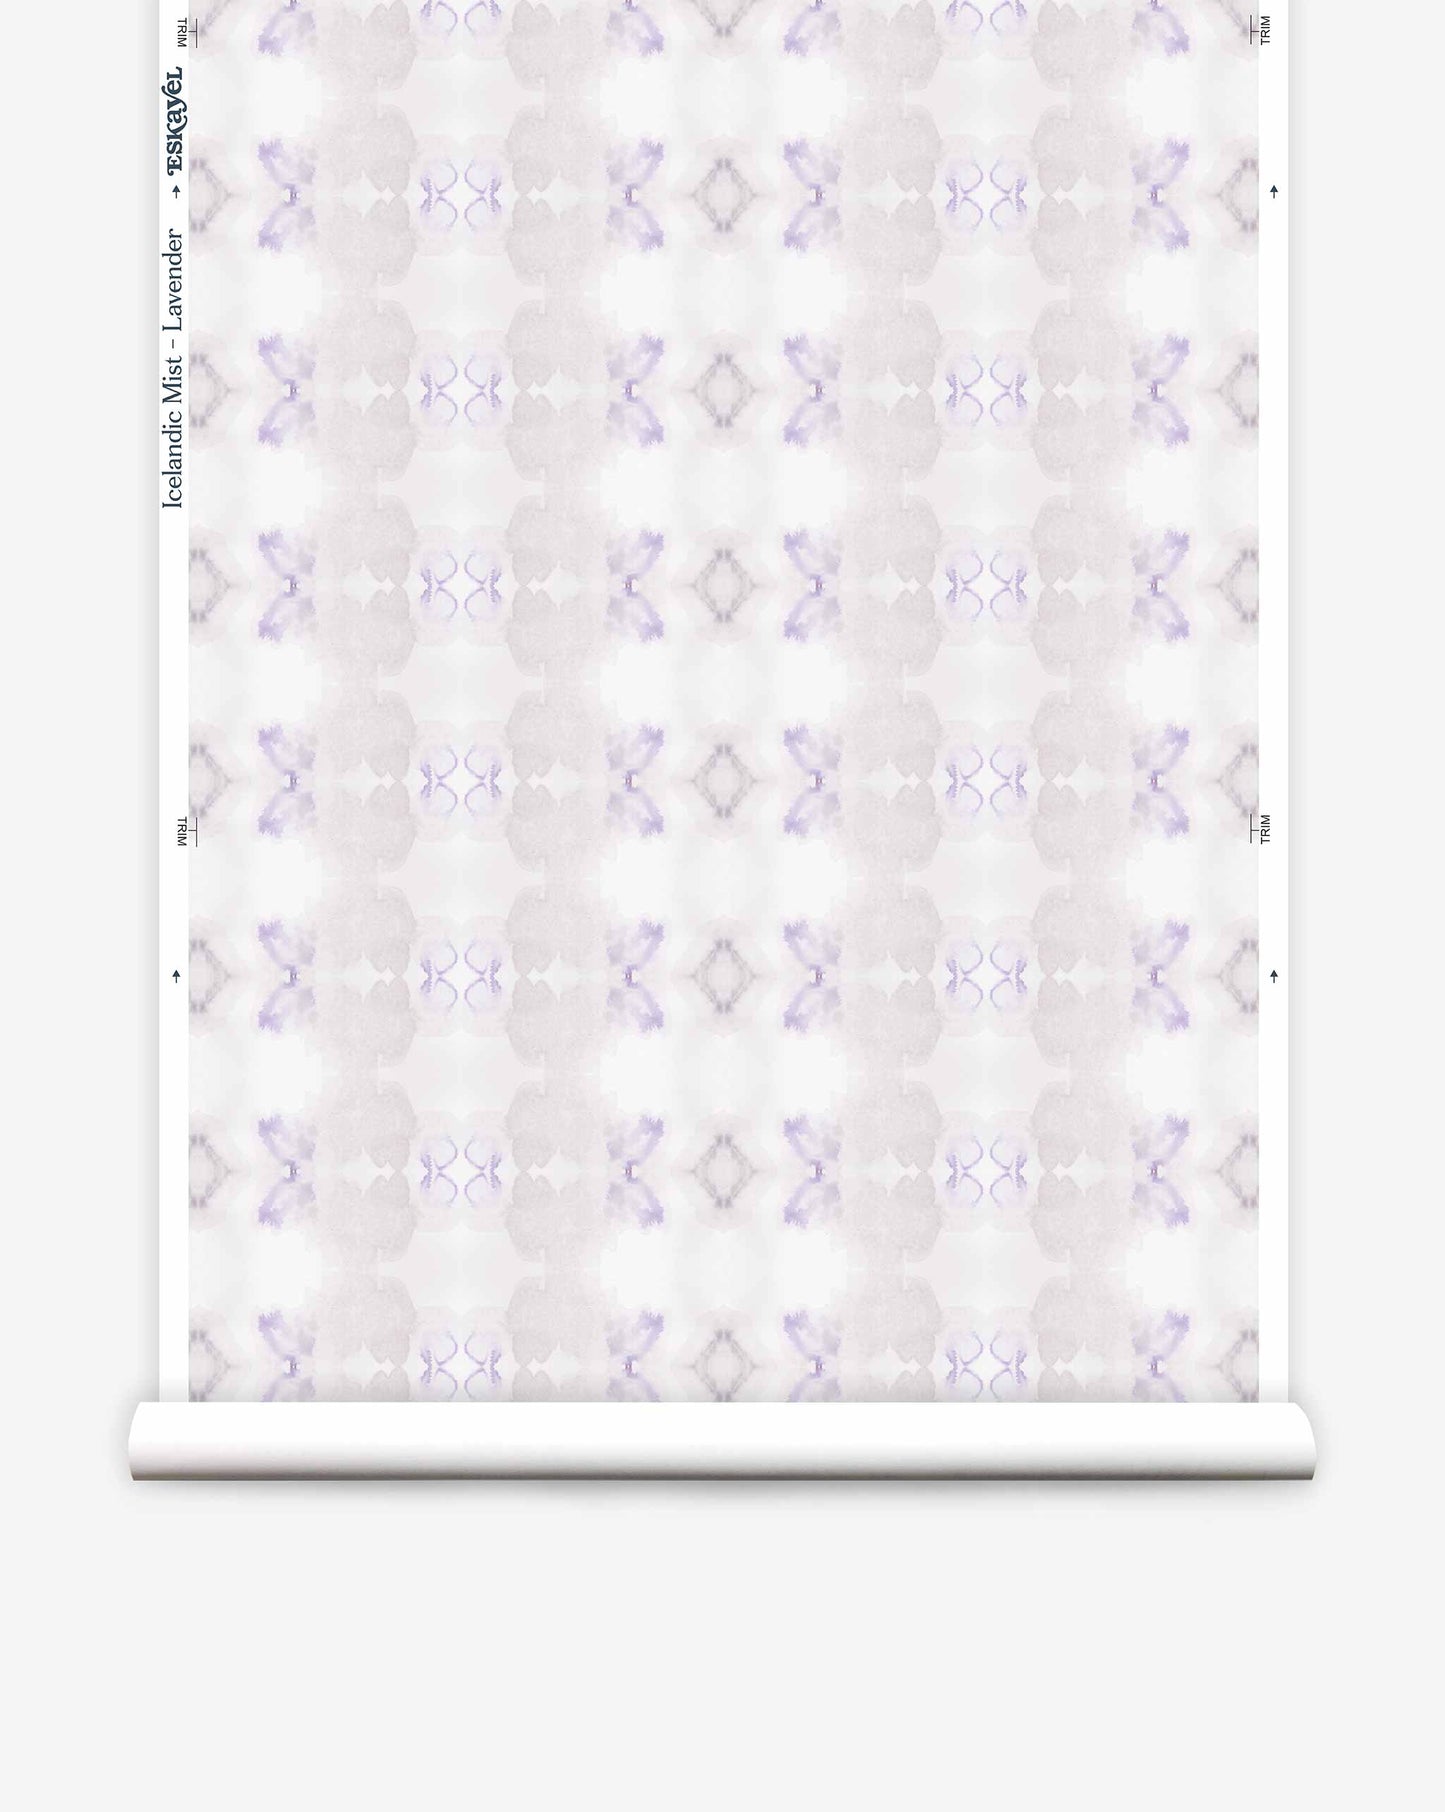 A luxurious Icelandic Mist Wallpaper in  Lavender features a white and purple pattern.